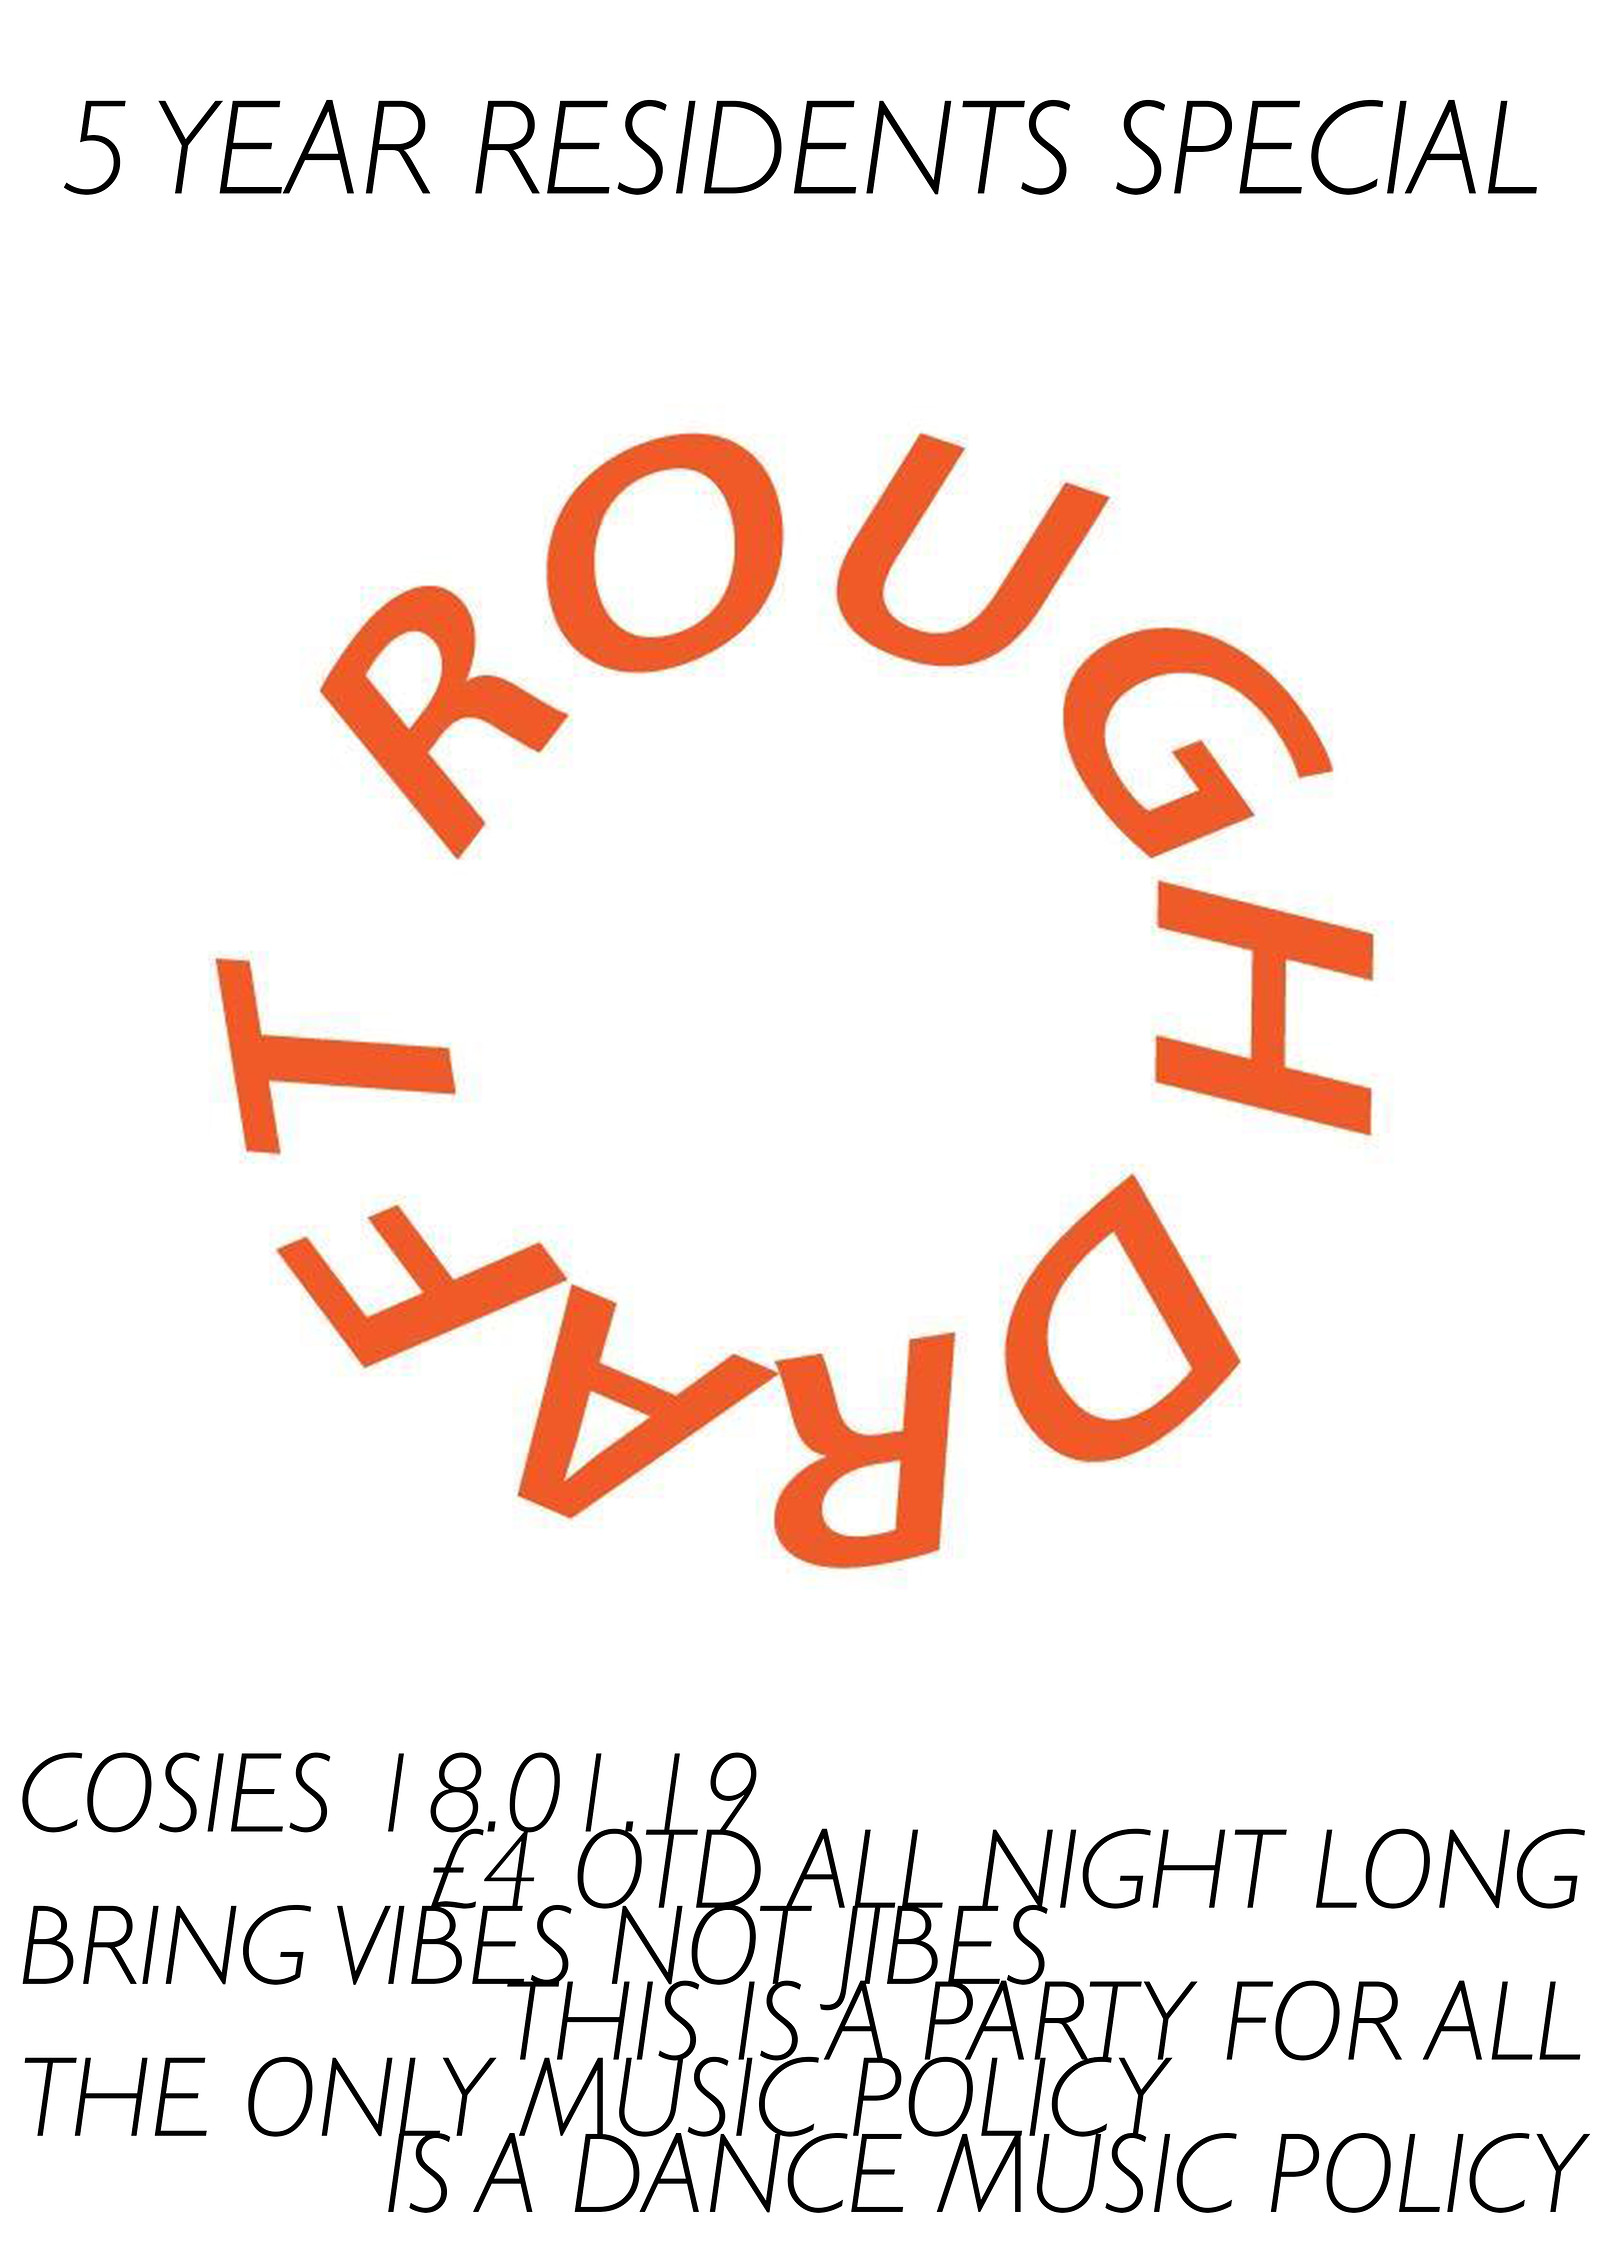 5 Years of Rough Draft Residents Special at Cosies